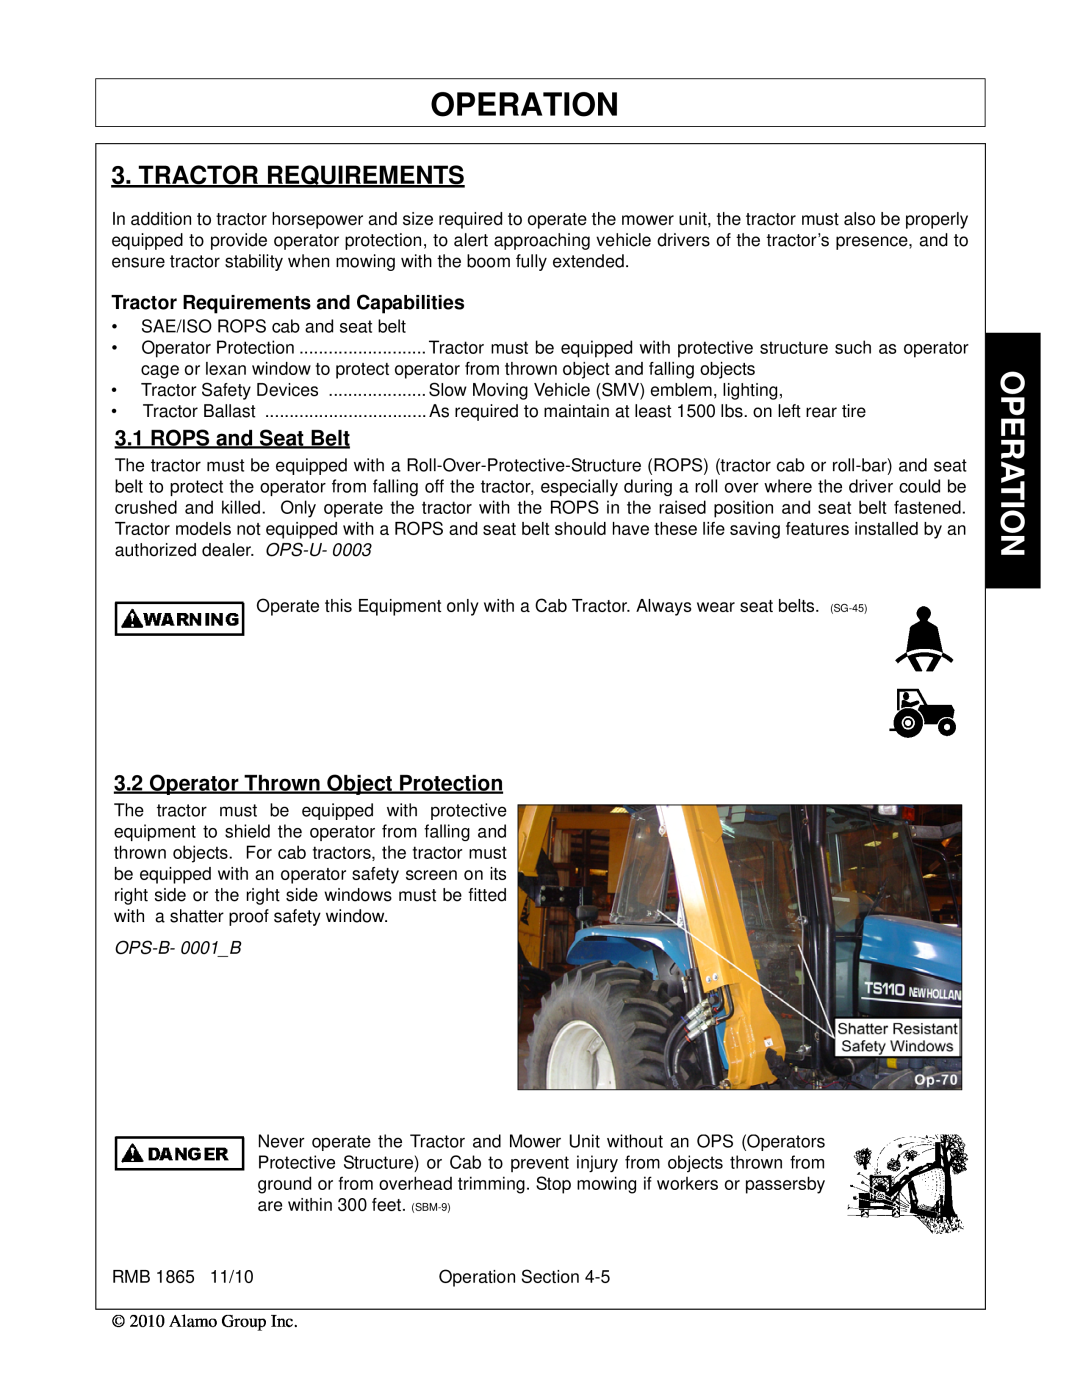 Bush Hog RMB 1865 manual Operation, Tractor Requirements, ROPS and Seat Belt, Operator Thrown Object Protection 